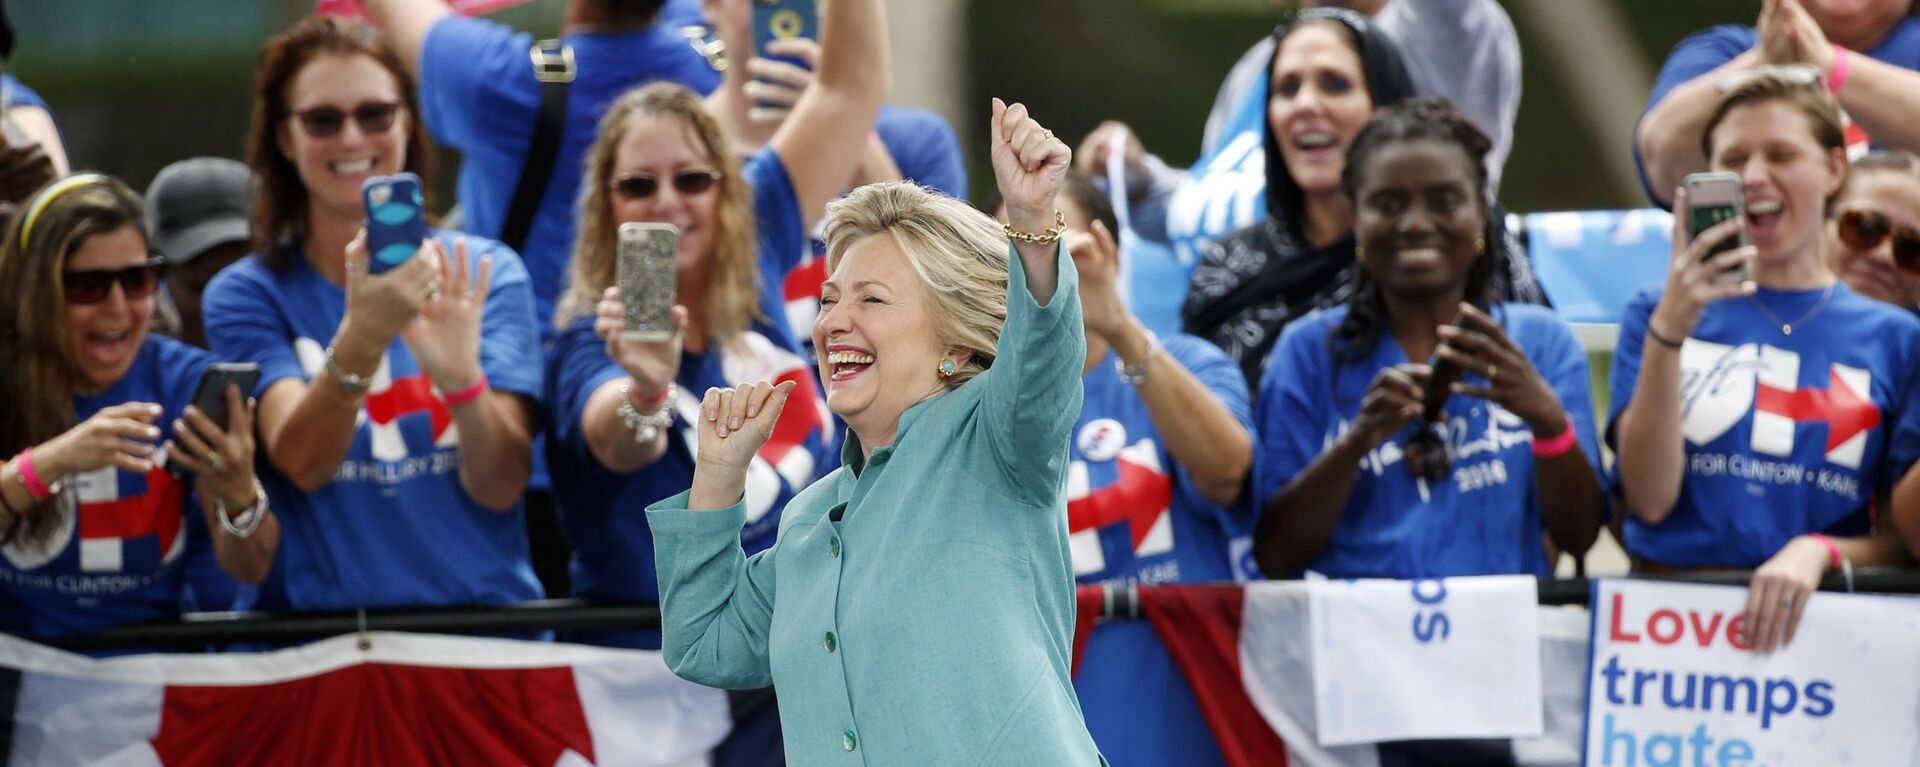 Democratic presidential candidate Hillary Clinton dances as she is introduced at a rally, Saturday, Nov. 5, 2016, in Pembroke Pines, Fla. - Sputnik International, 1920, 21.12.2021